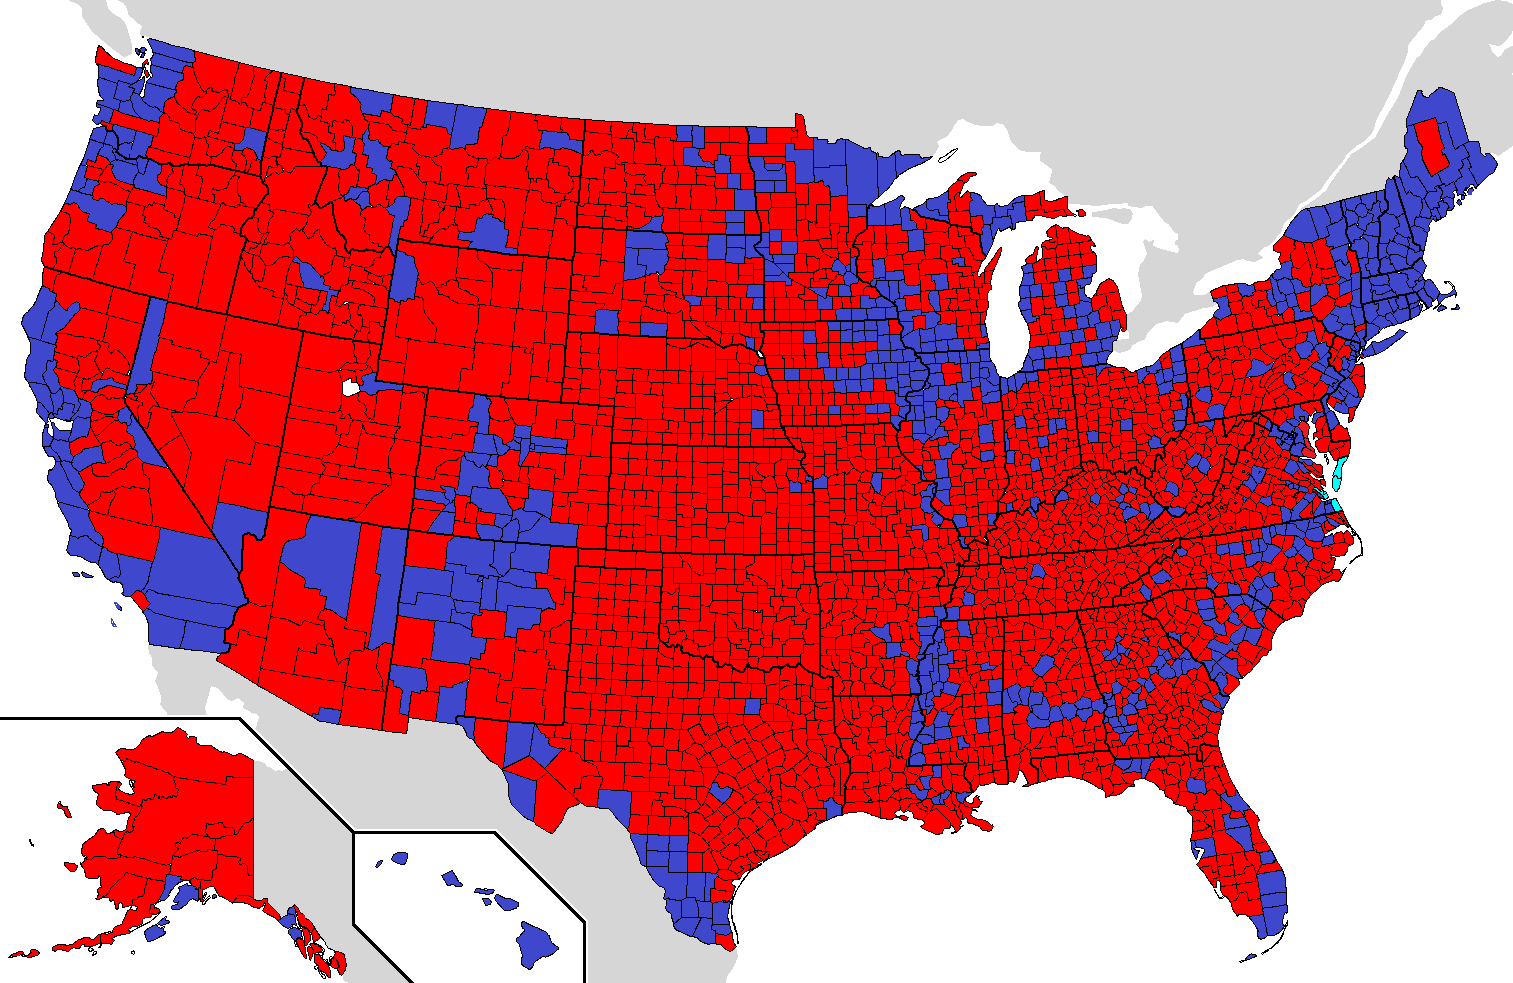 US%2BElection%2BCounty-Level%2BMap%252C%2B2012.png